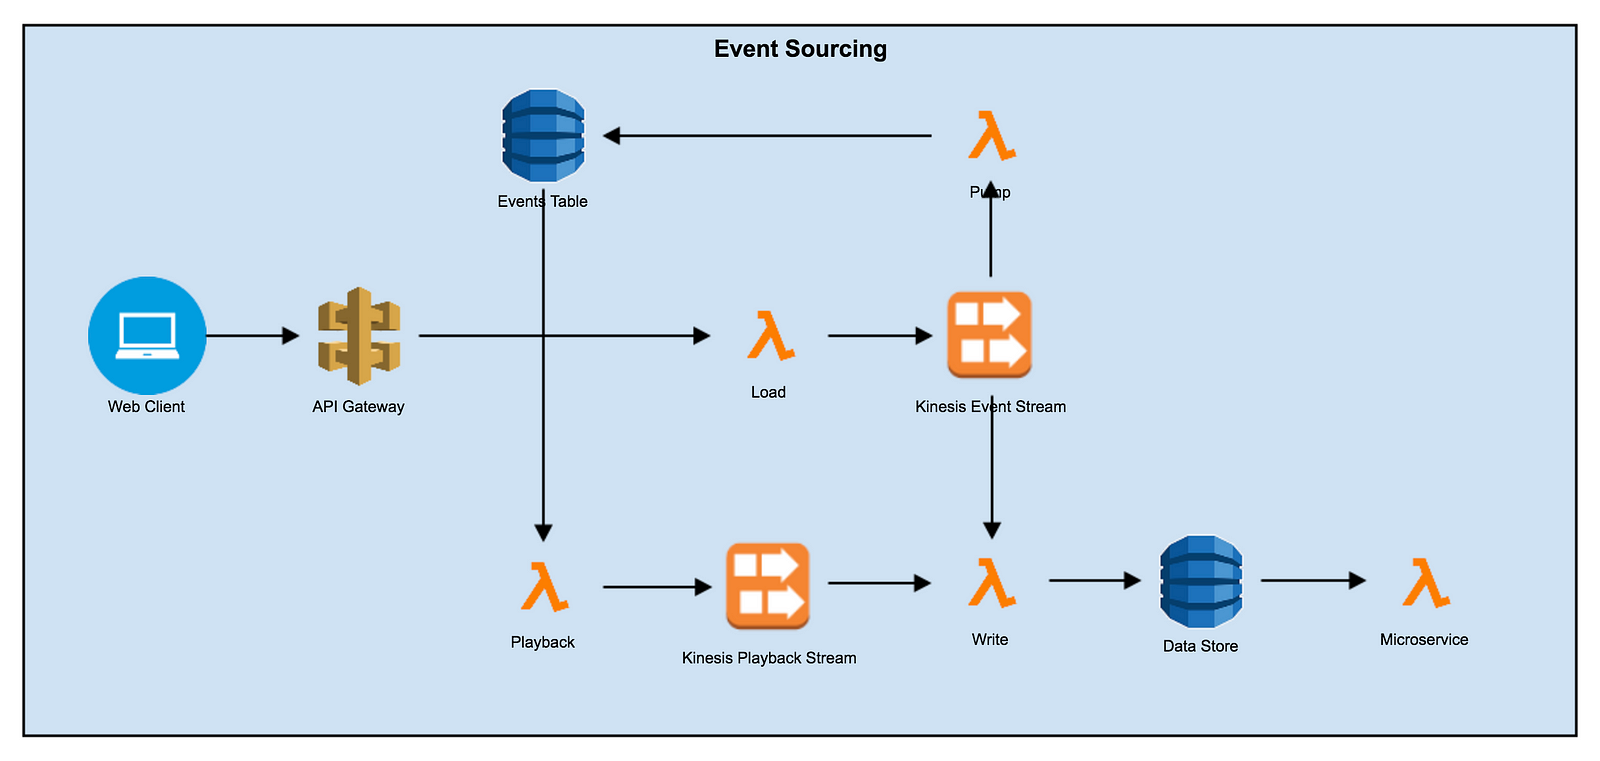 Use event. Event Sourcing. Event Sourcing архитектура. Event Sourcing паттерн. Event Sourcing примеры.